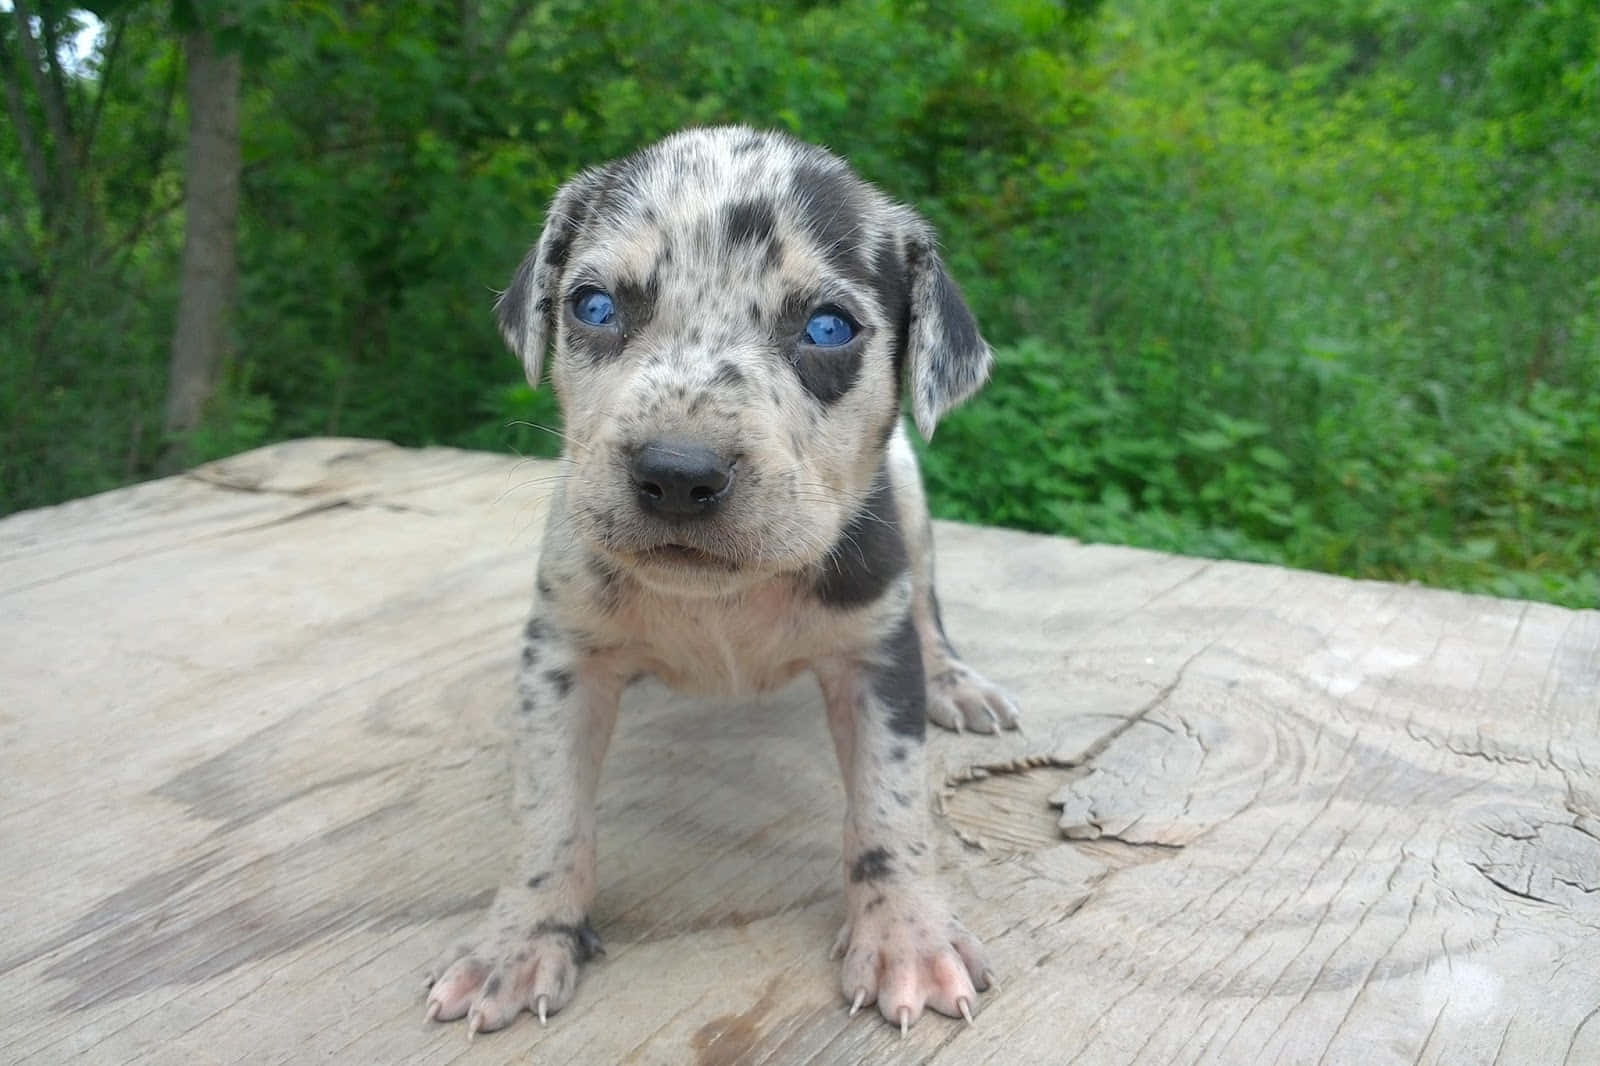 A Small Puppy With Blue Eyes Sitting On A Wooden Table